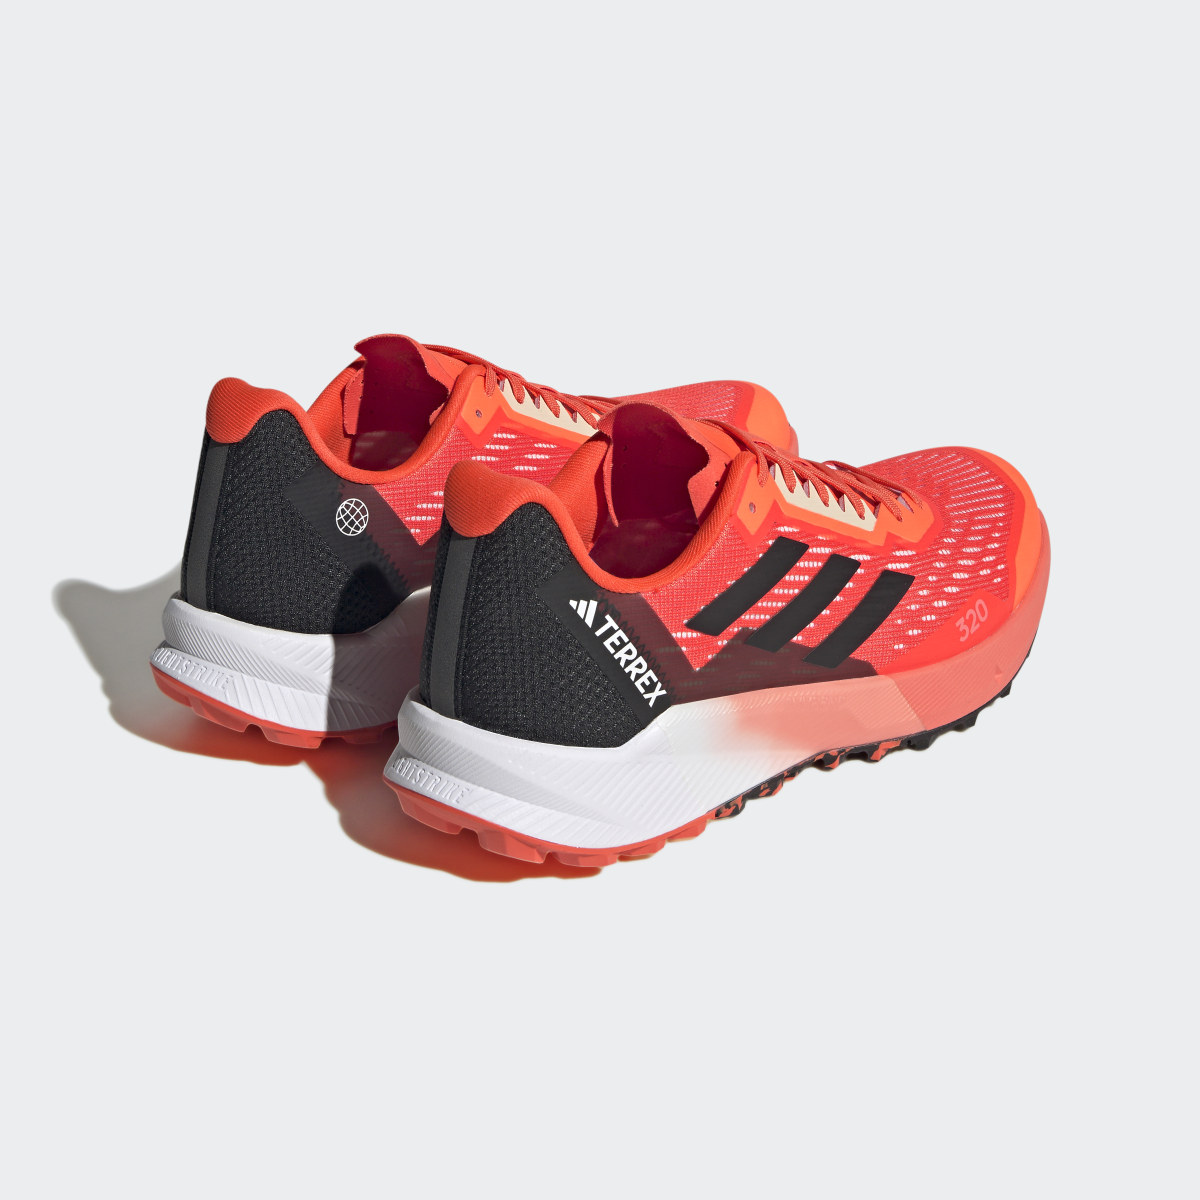 Adidas Terrex Agravic Flow Trail Running Shoes 2.0. 6